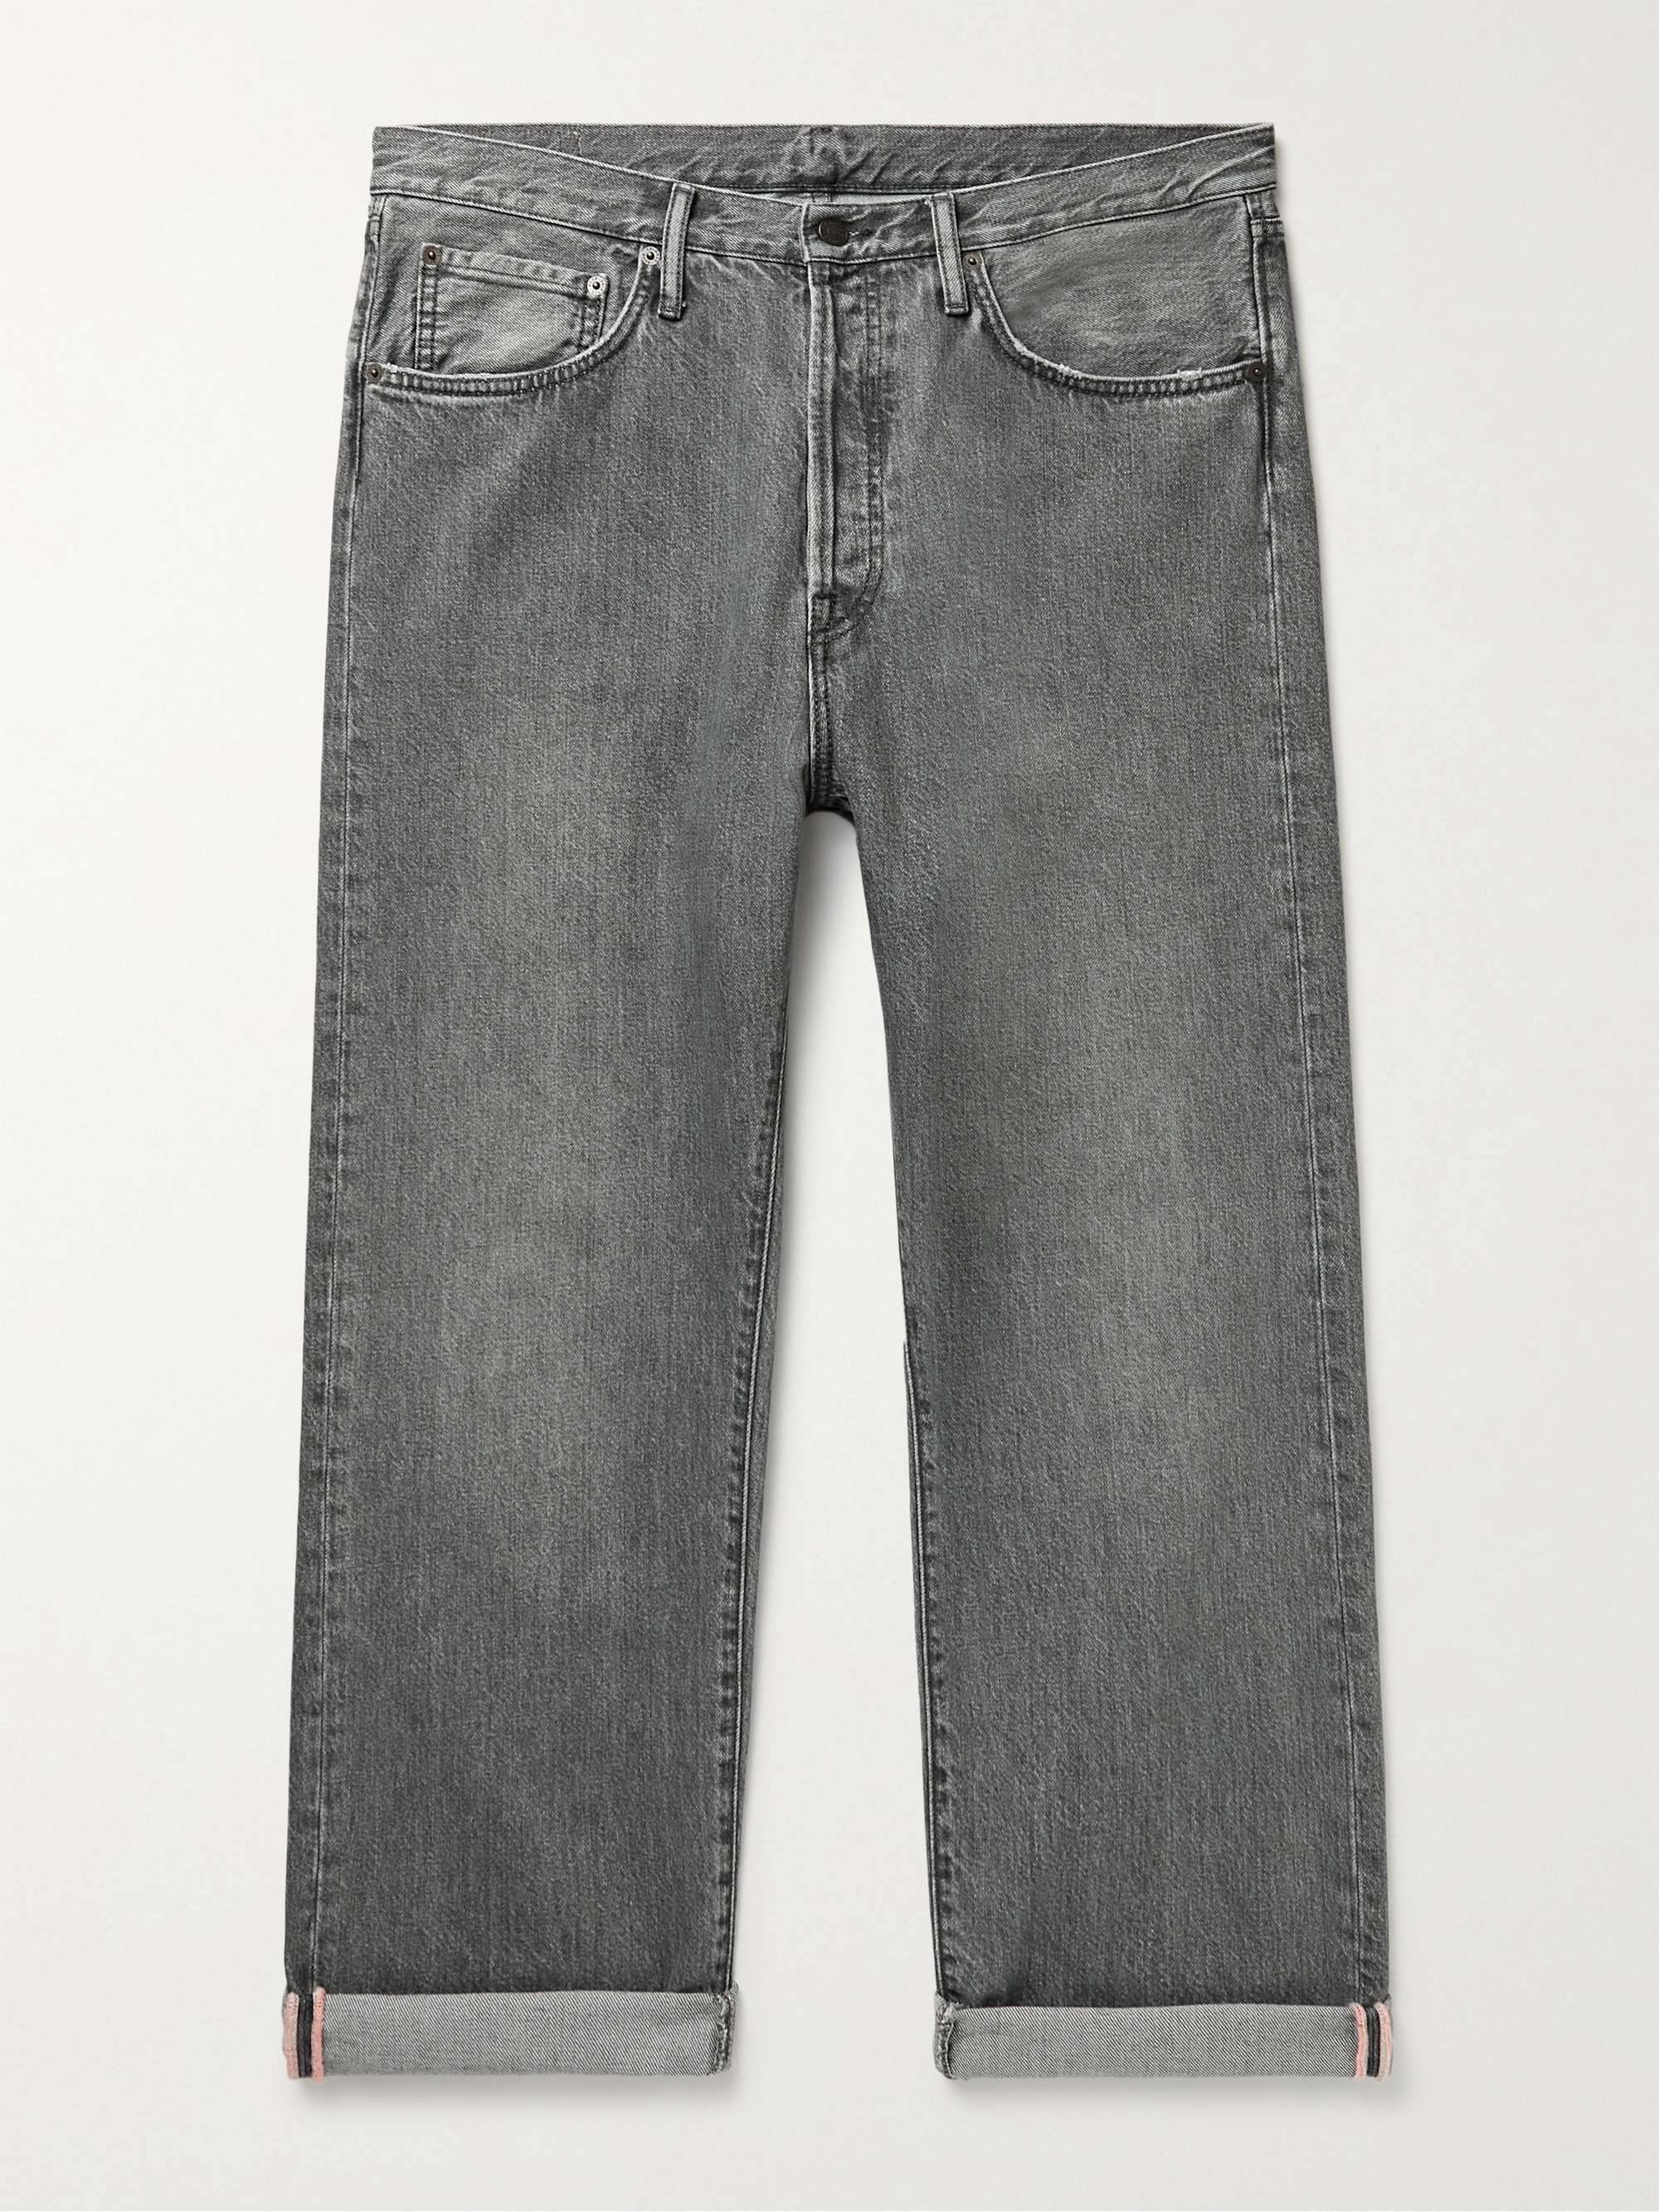 ACNE STUDIOS Washed Selvedge Jeans